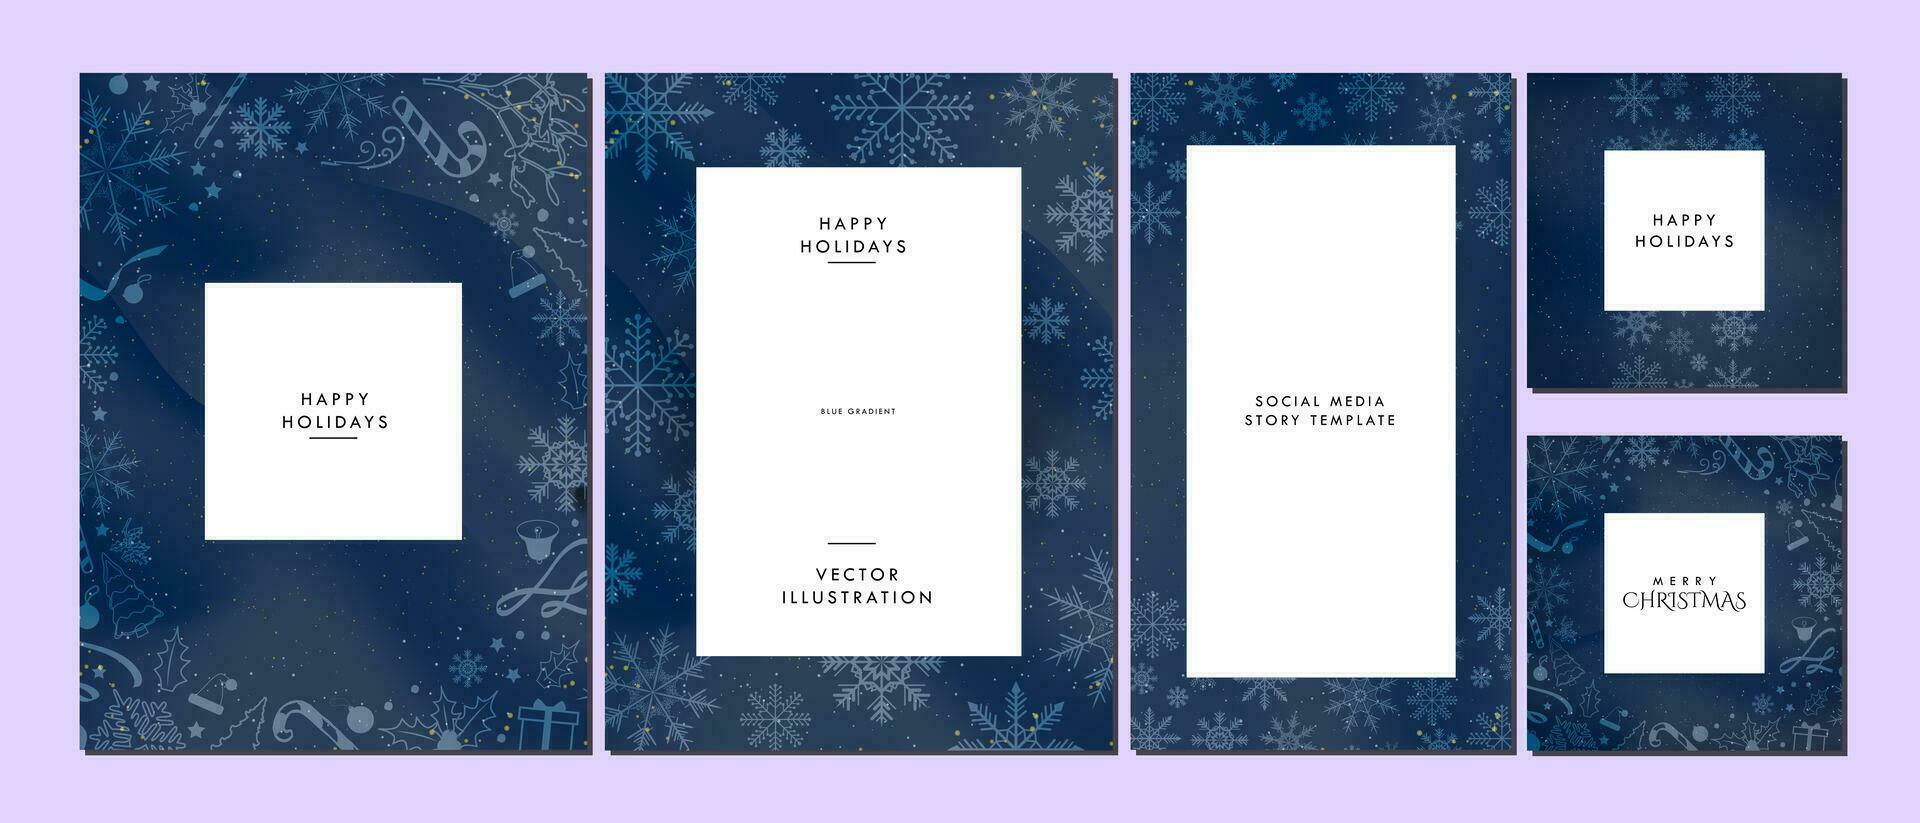 Merry Christmas and Happy Holiday Greeting Cards, social media story, and Poster on blue gradient background and soft white Christmas elements. Elegant Christmas Template designs. Vector Art.